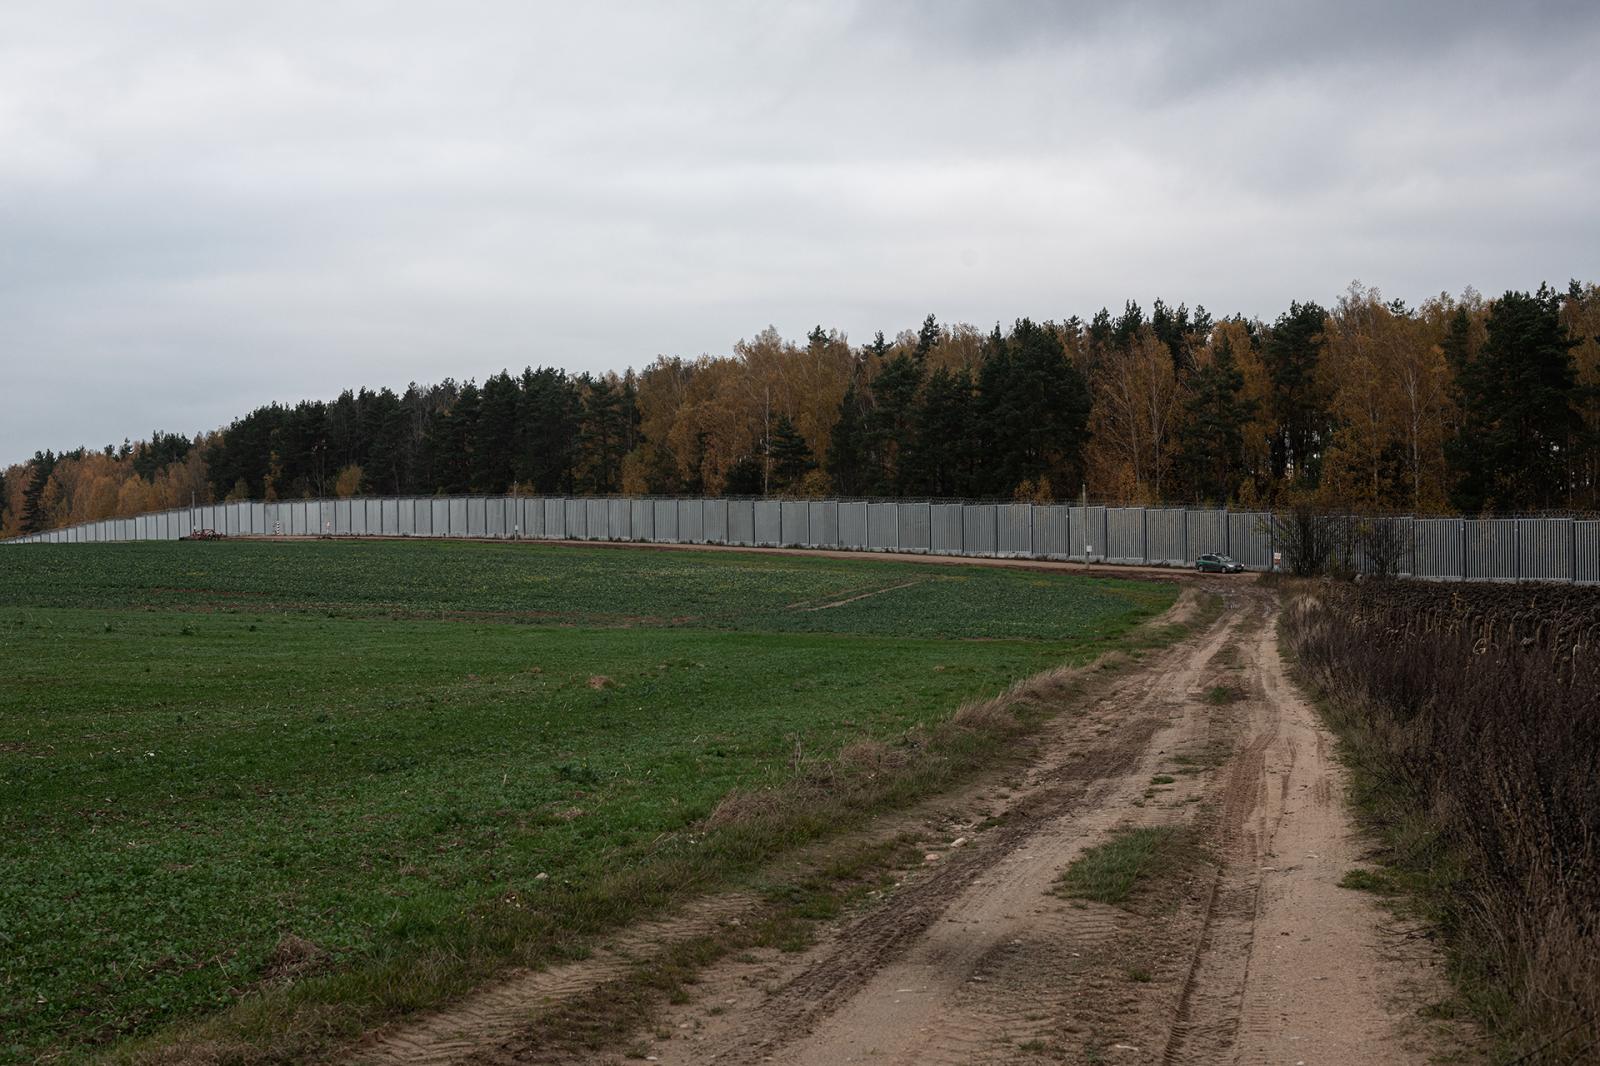 The anti-migration fence, with ...land and Belarus. Krynki Poland